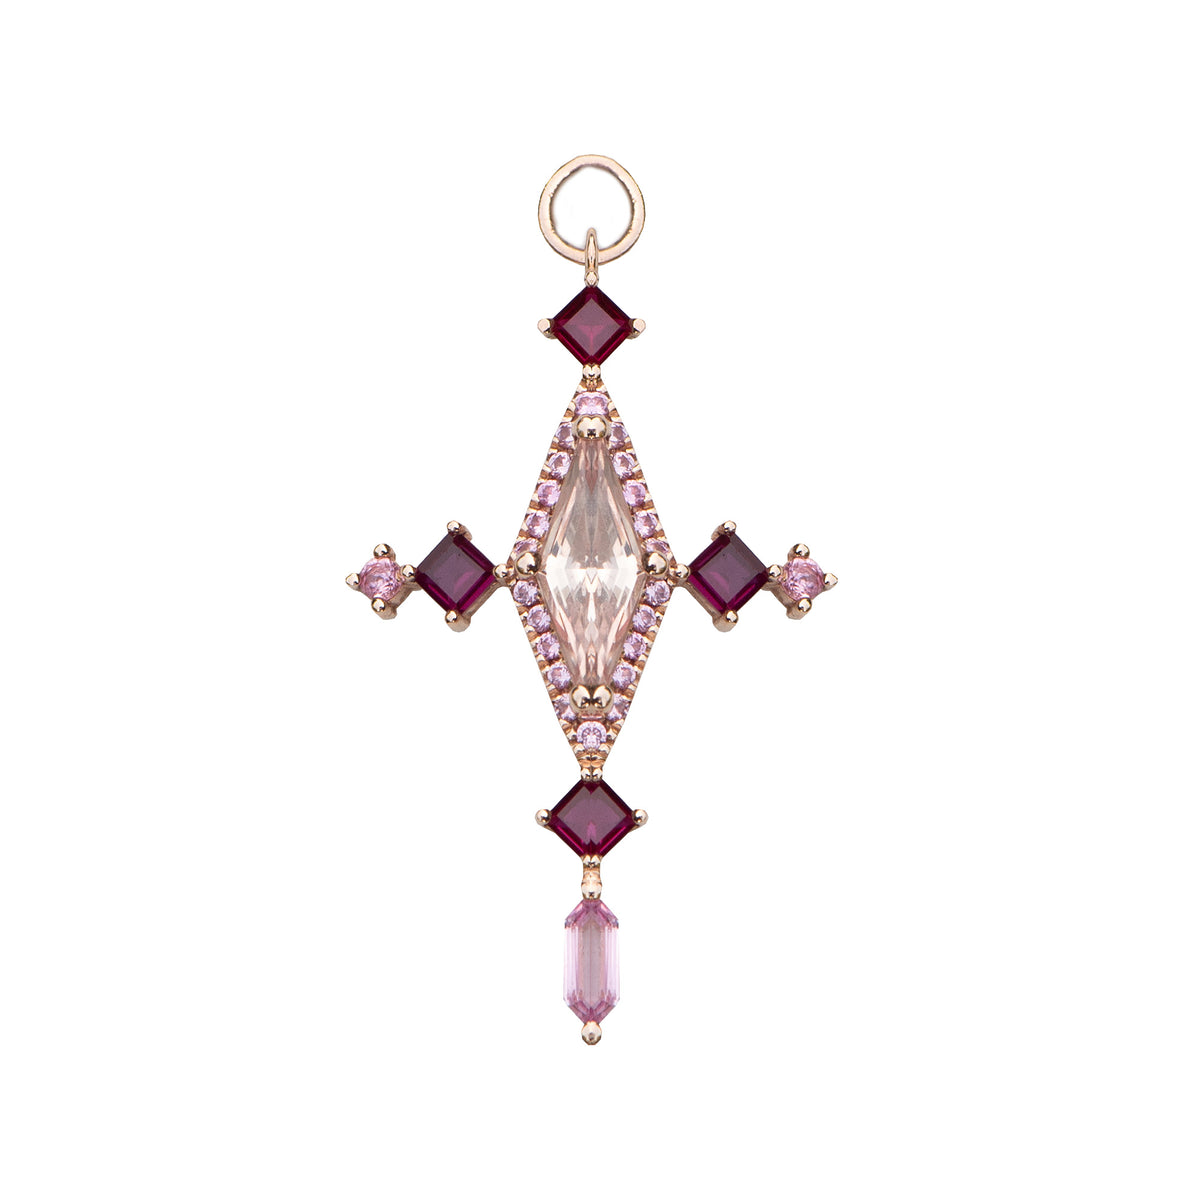 The Padparadscha and Ruby Cross Hoop Earring